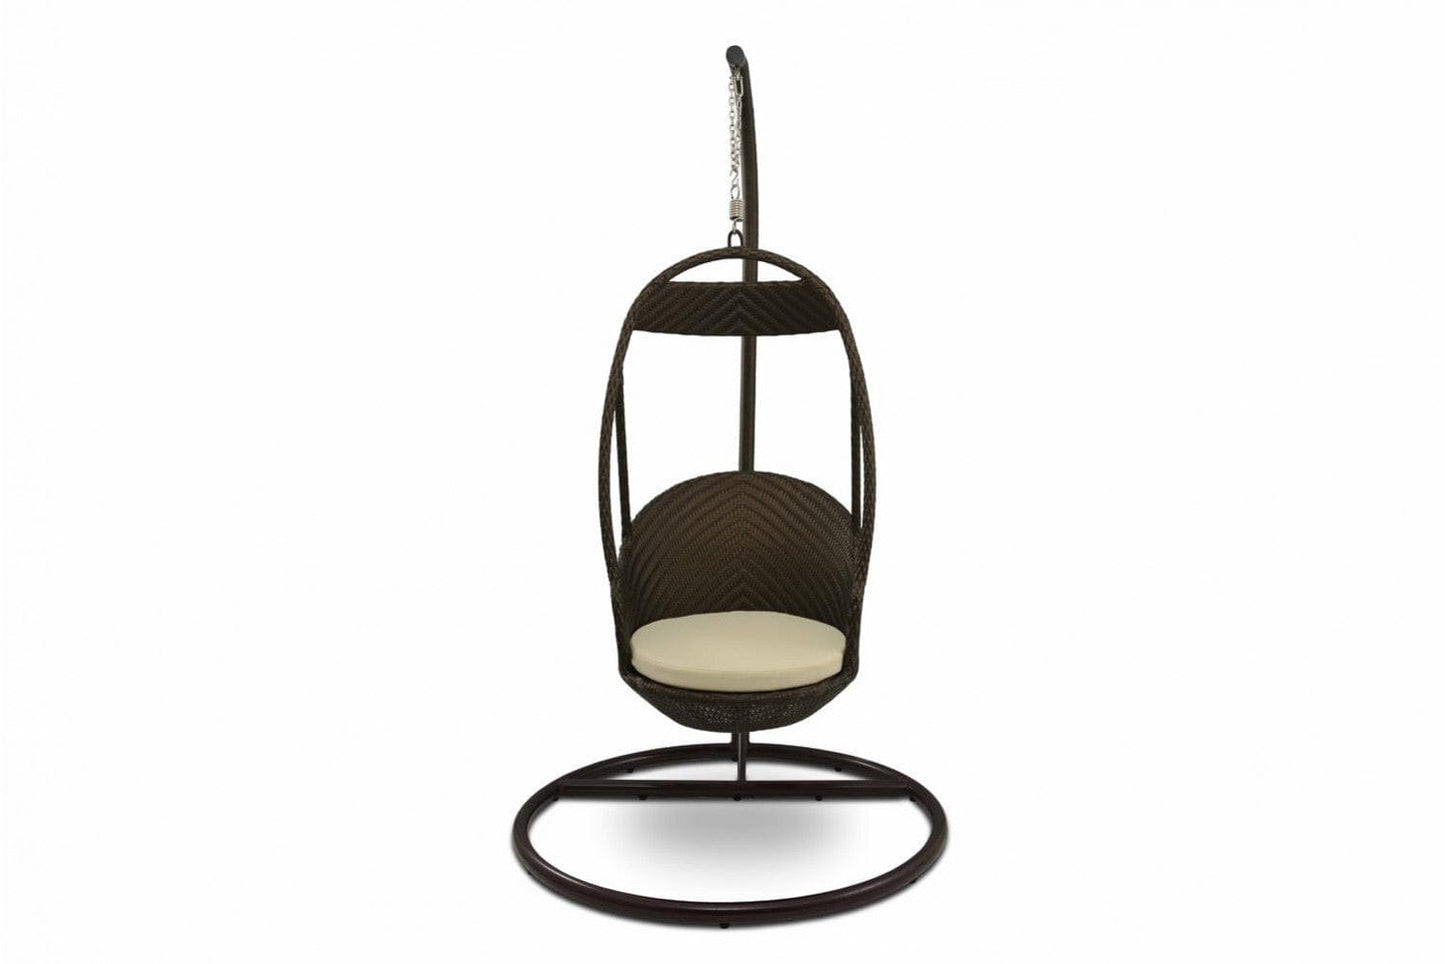 Dreamline Single Seater Chair Style Hanging Swing Jhula With Stand For Balcony/Garden/Indoor (Dark brown)